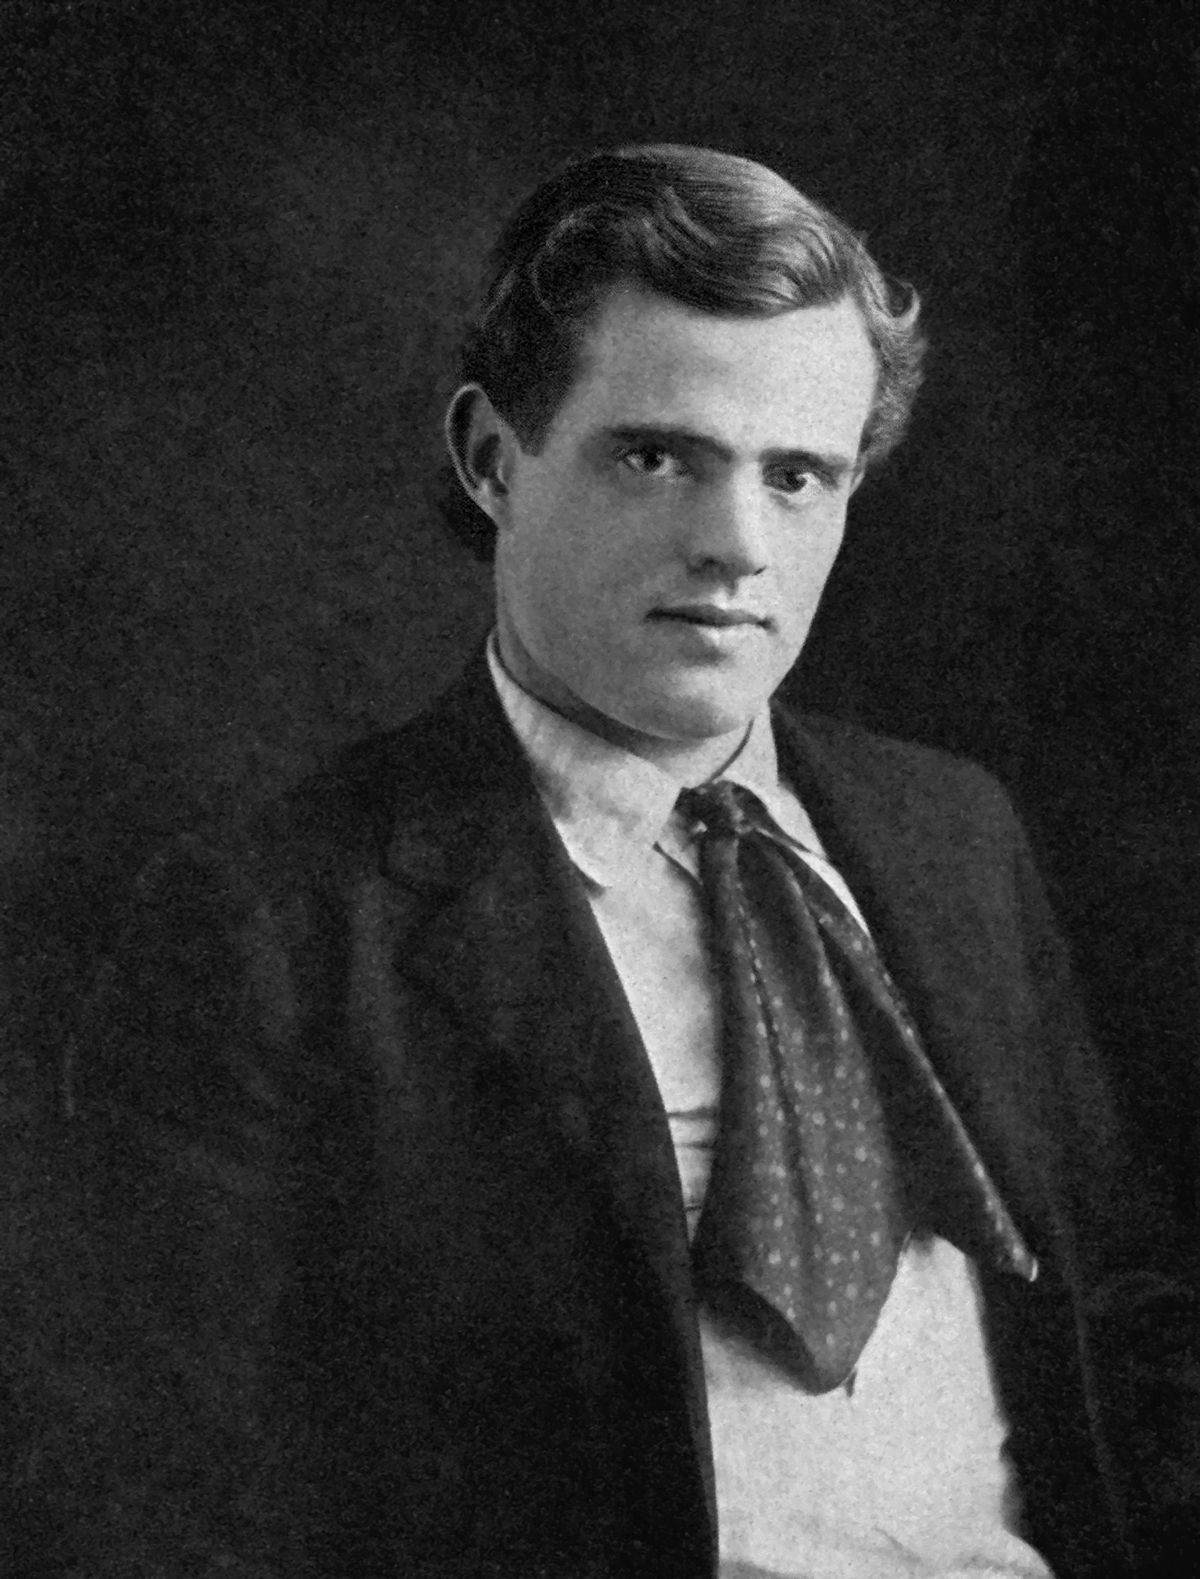 Episode 65: Jack London, The Call of the Wild